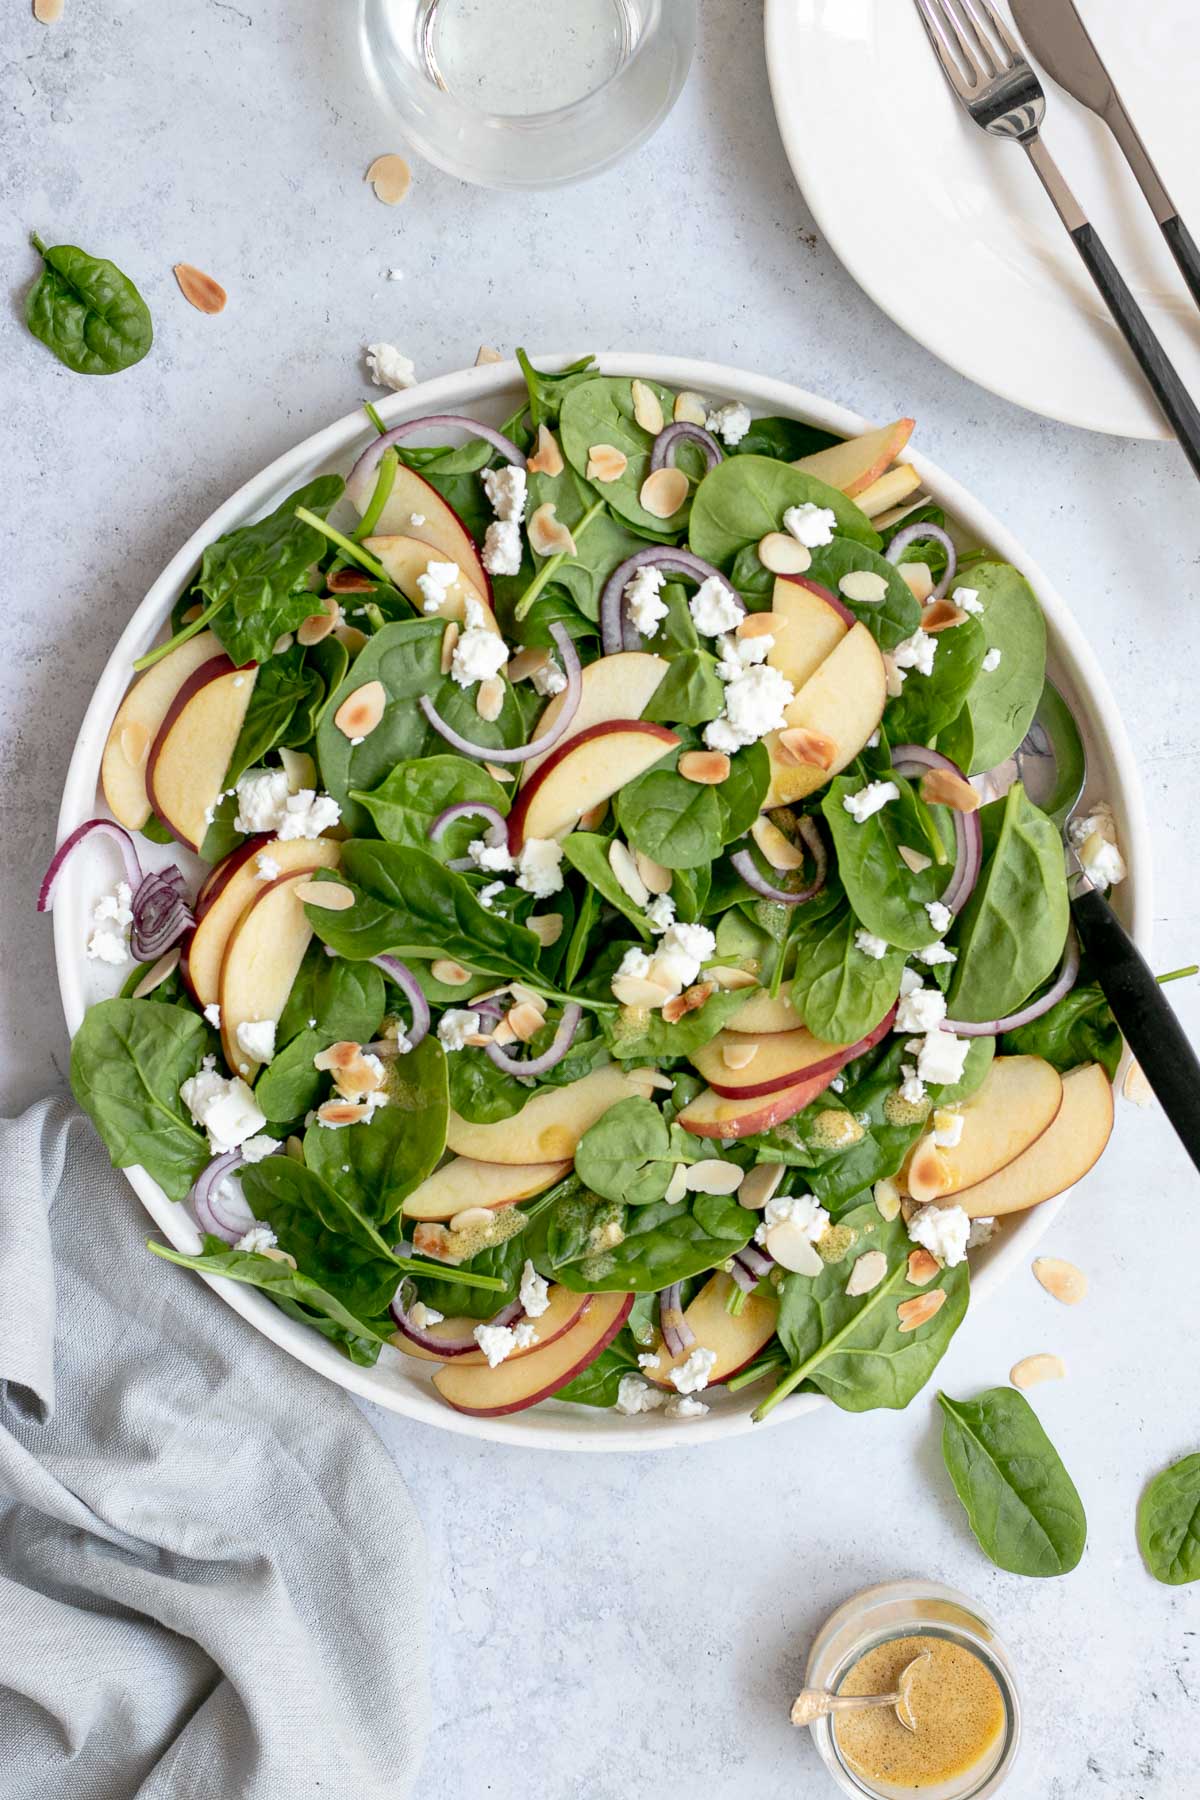 Spinach Salad with Red Wine Vinaigrette in bowl